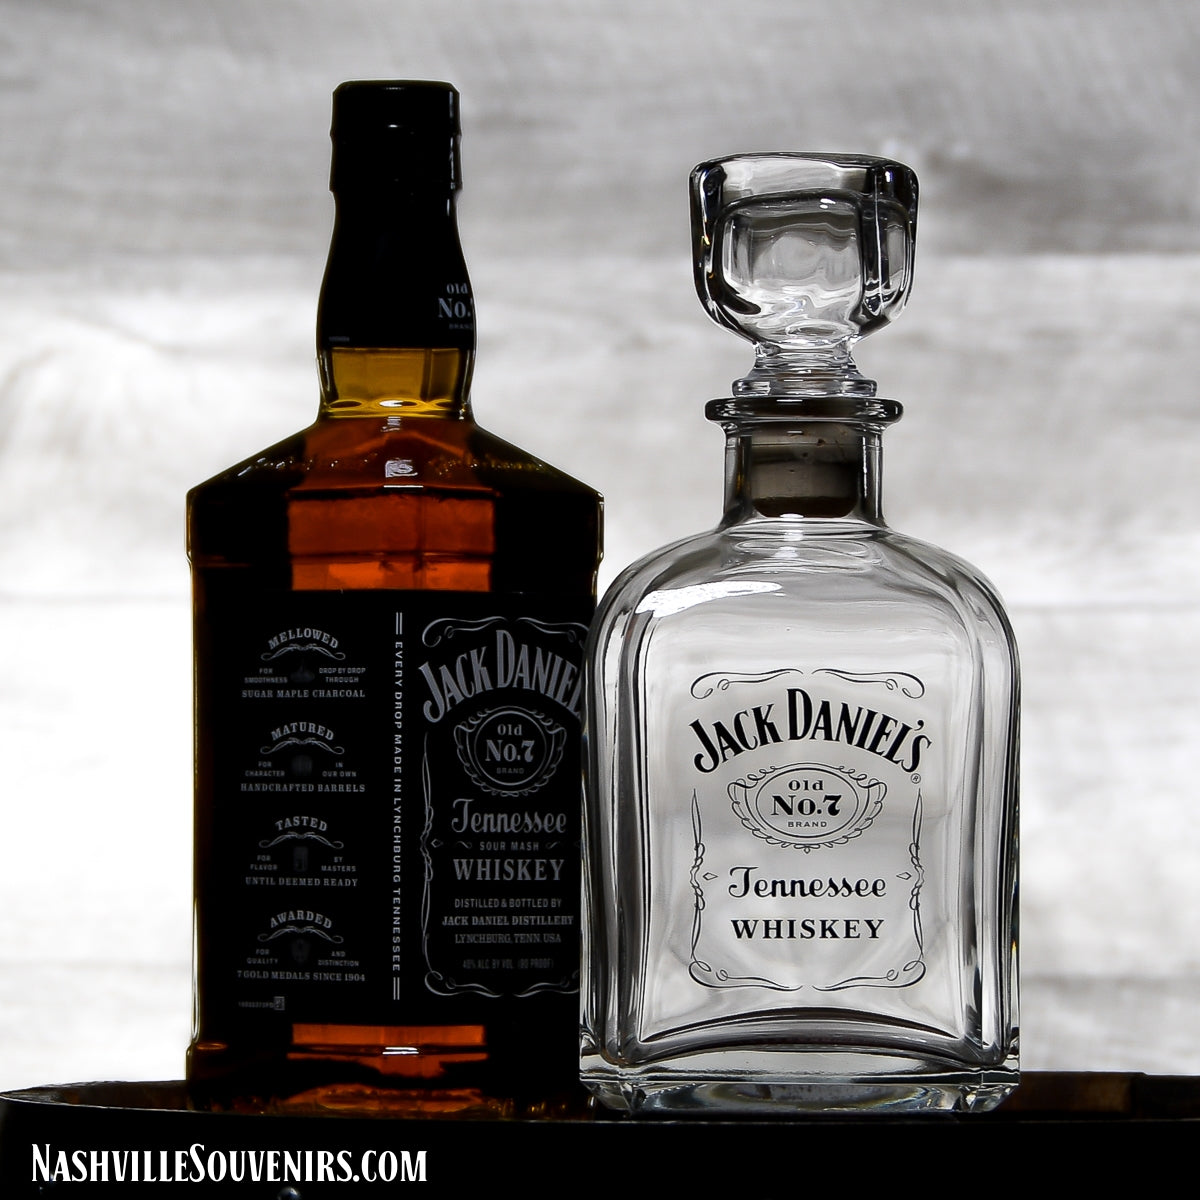 Impress the crew when pouring from this Jack Daniels Decanter with the Bottle Label Logo. FREE SHIPPING on all US orders over $75! But, as the JD lawyers say, "Drink Responsibly". Ha Ha .